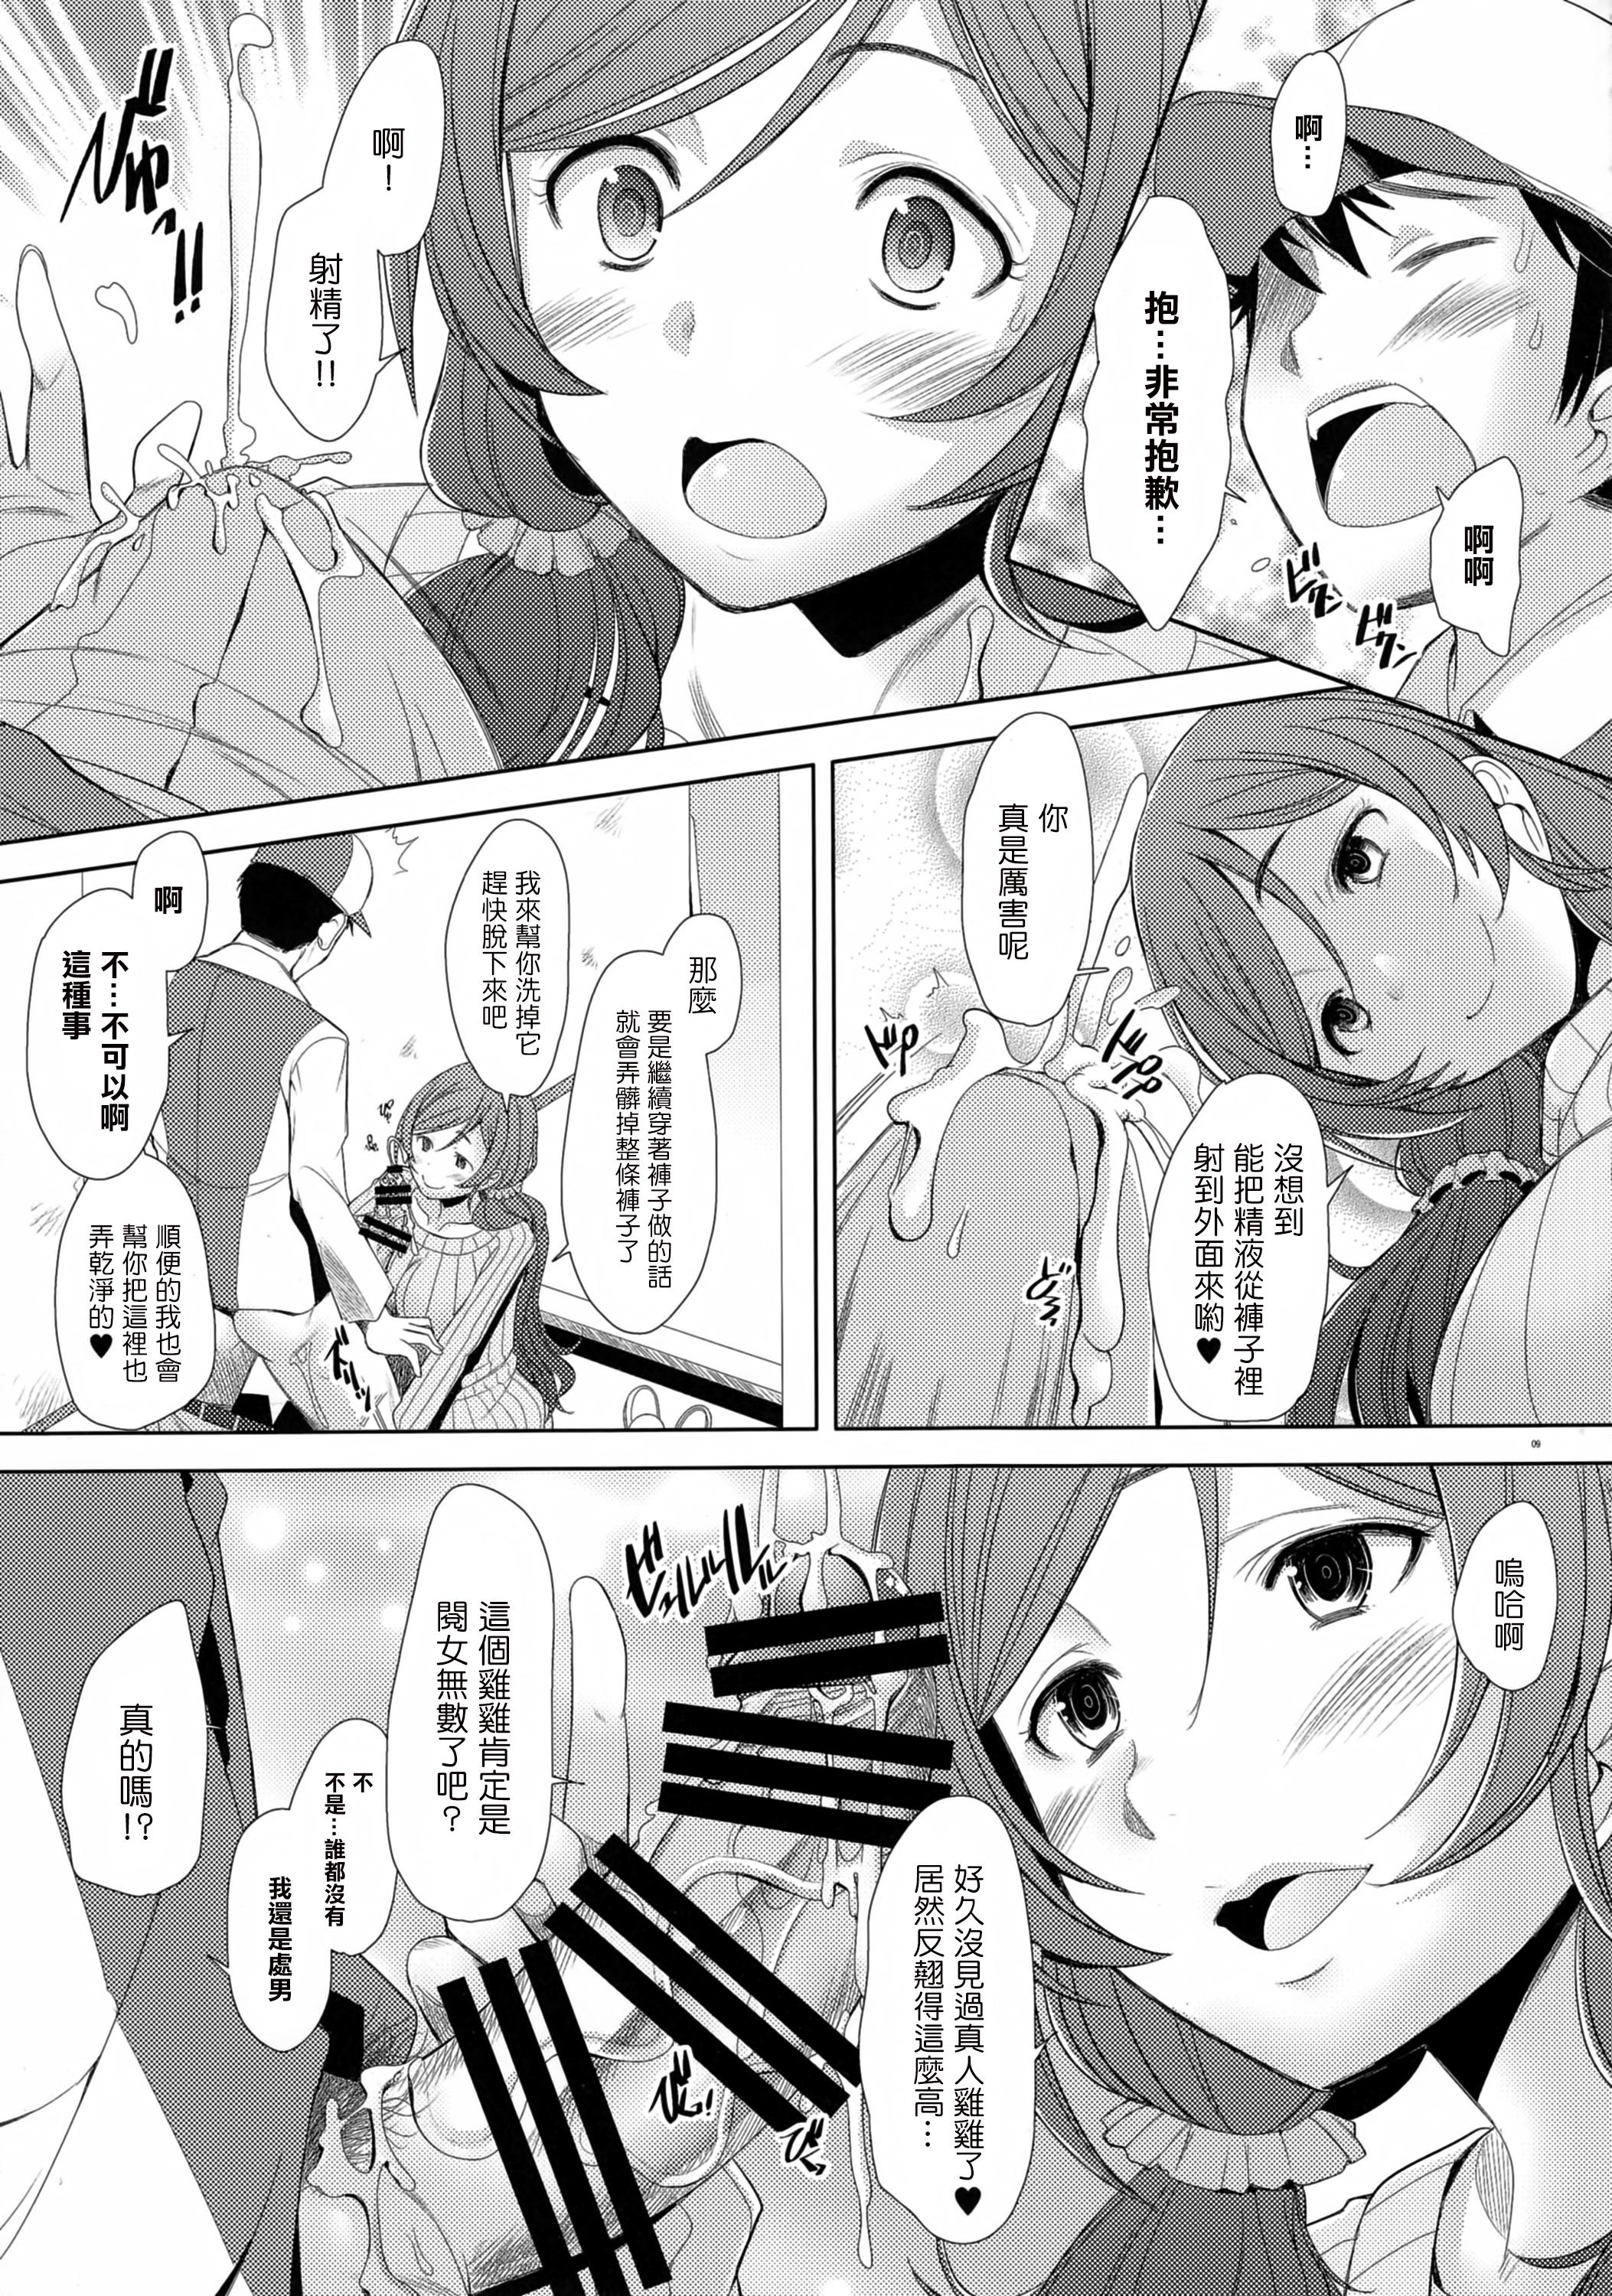 Old Vs Young NONNON29 - Love live Deflowered - Page 9